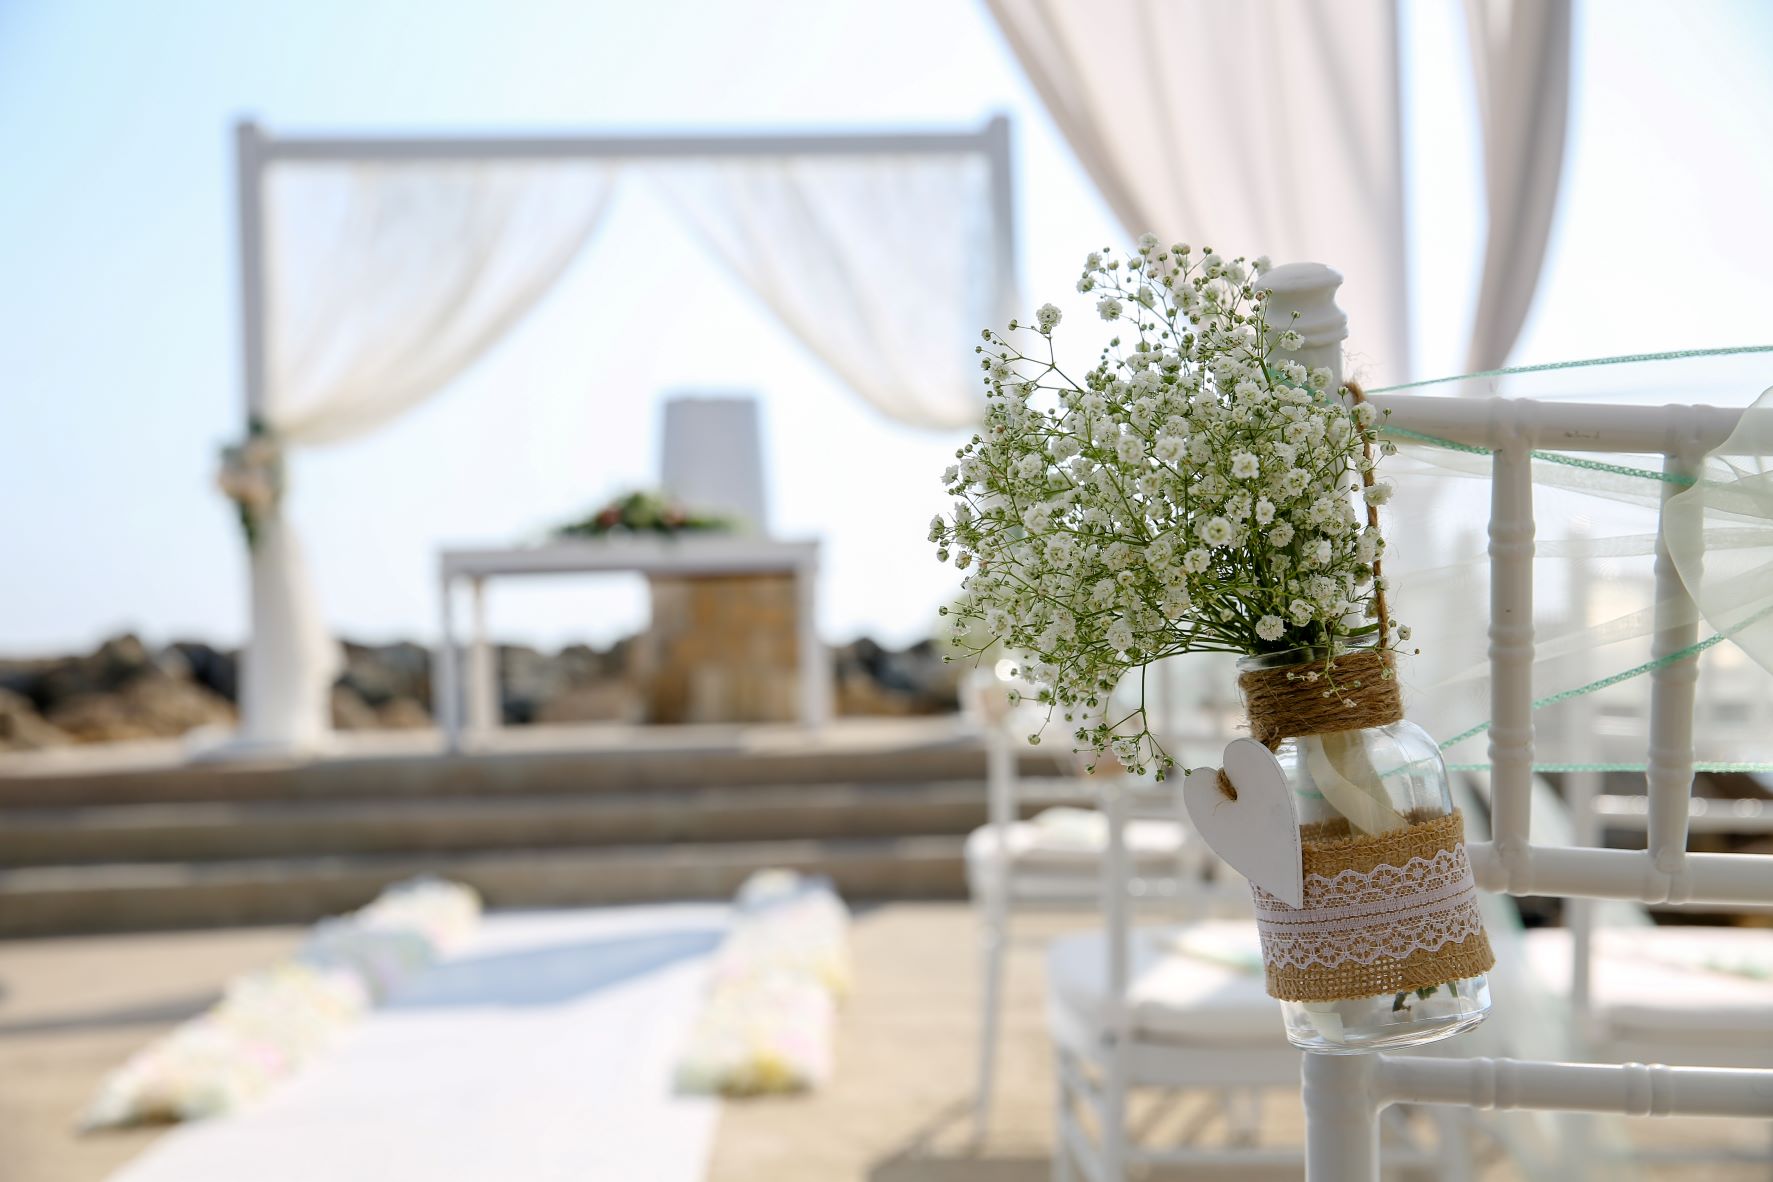 Book your wedding day in Coral Beach Hotel & Resort Paphos